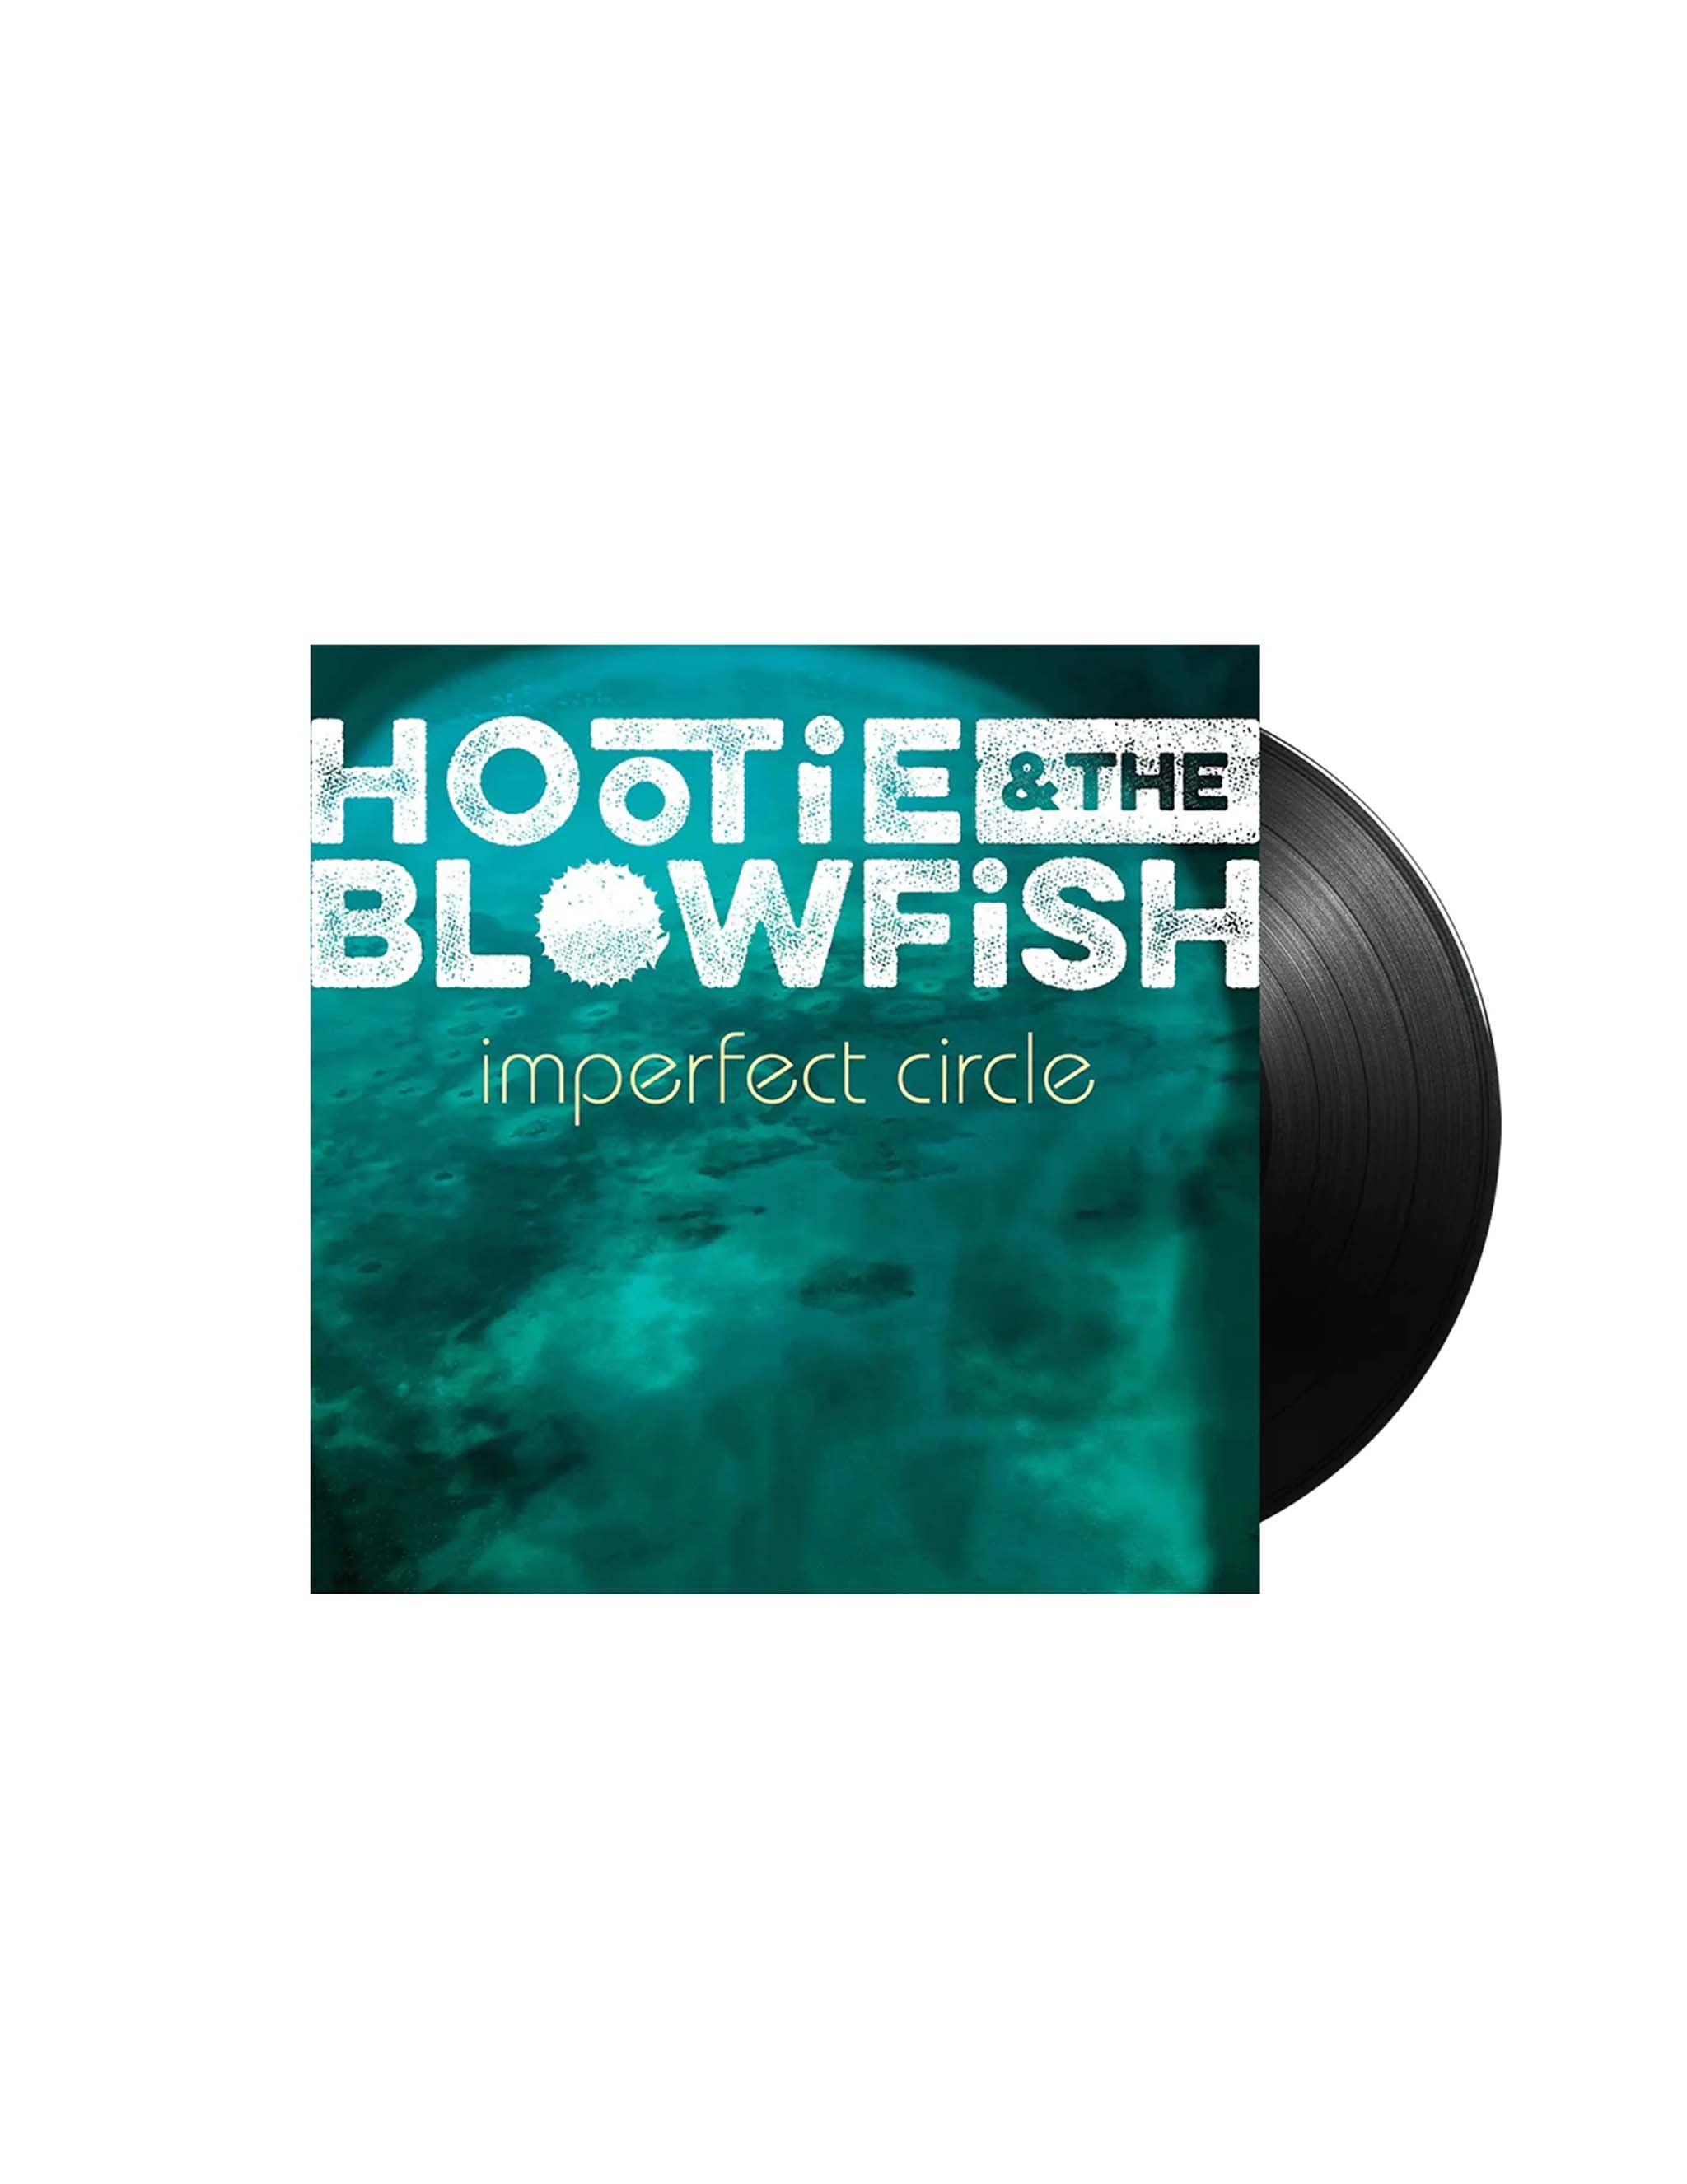 Hootie & The Blowfish: Imperfect Circle (LP)